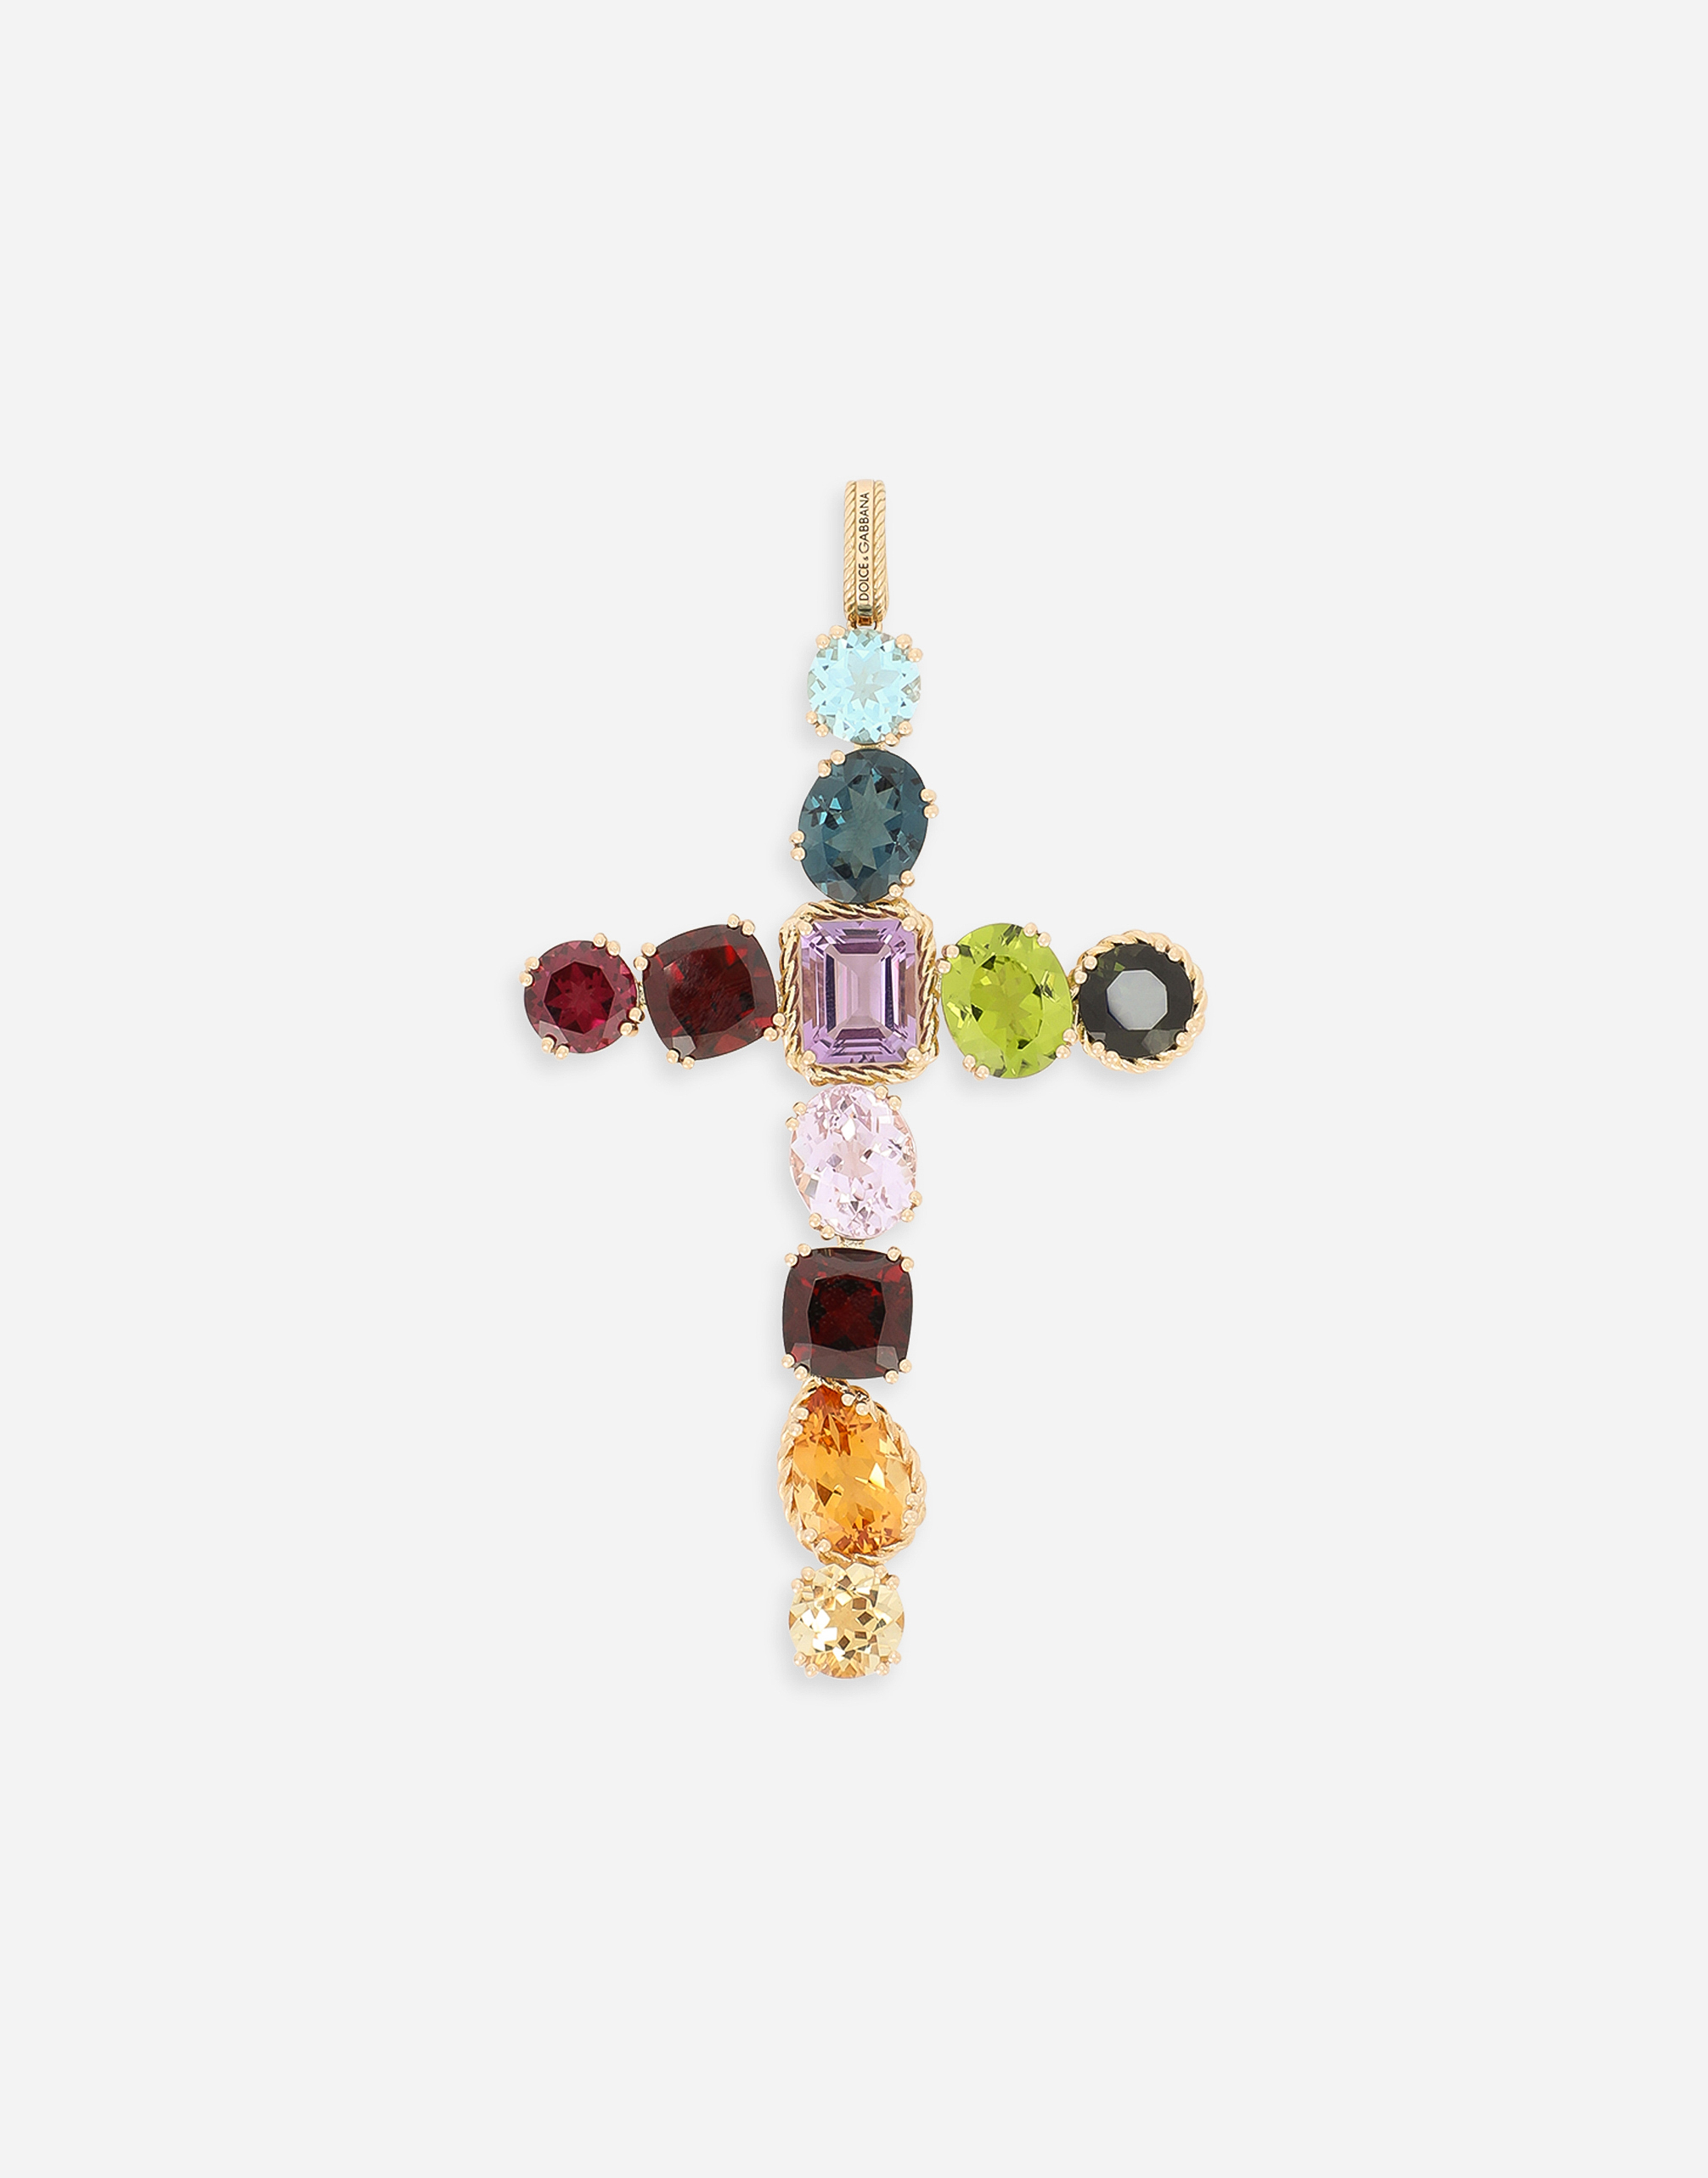 Dolce & Gabbana Rainbow Charm In Yellow Gold 18kt With Multicolor Stones